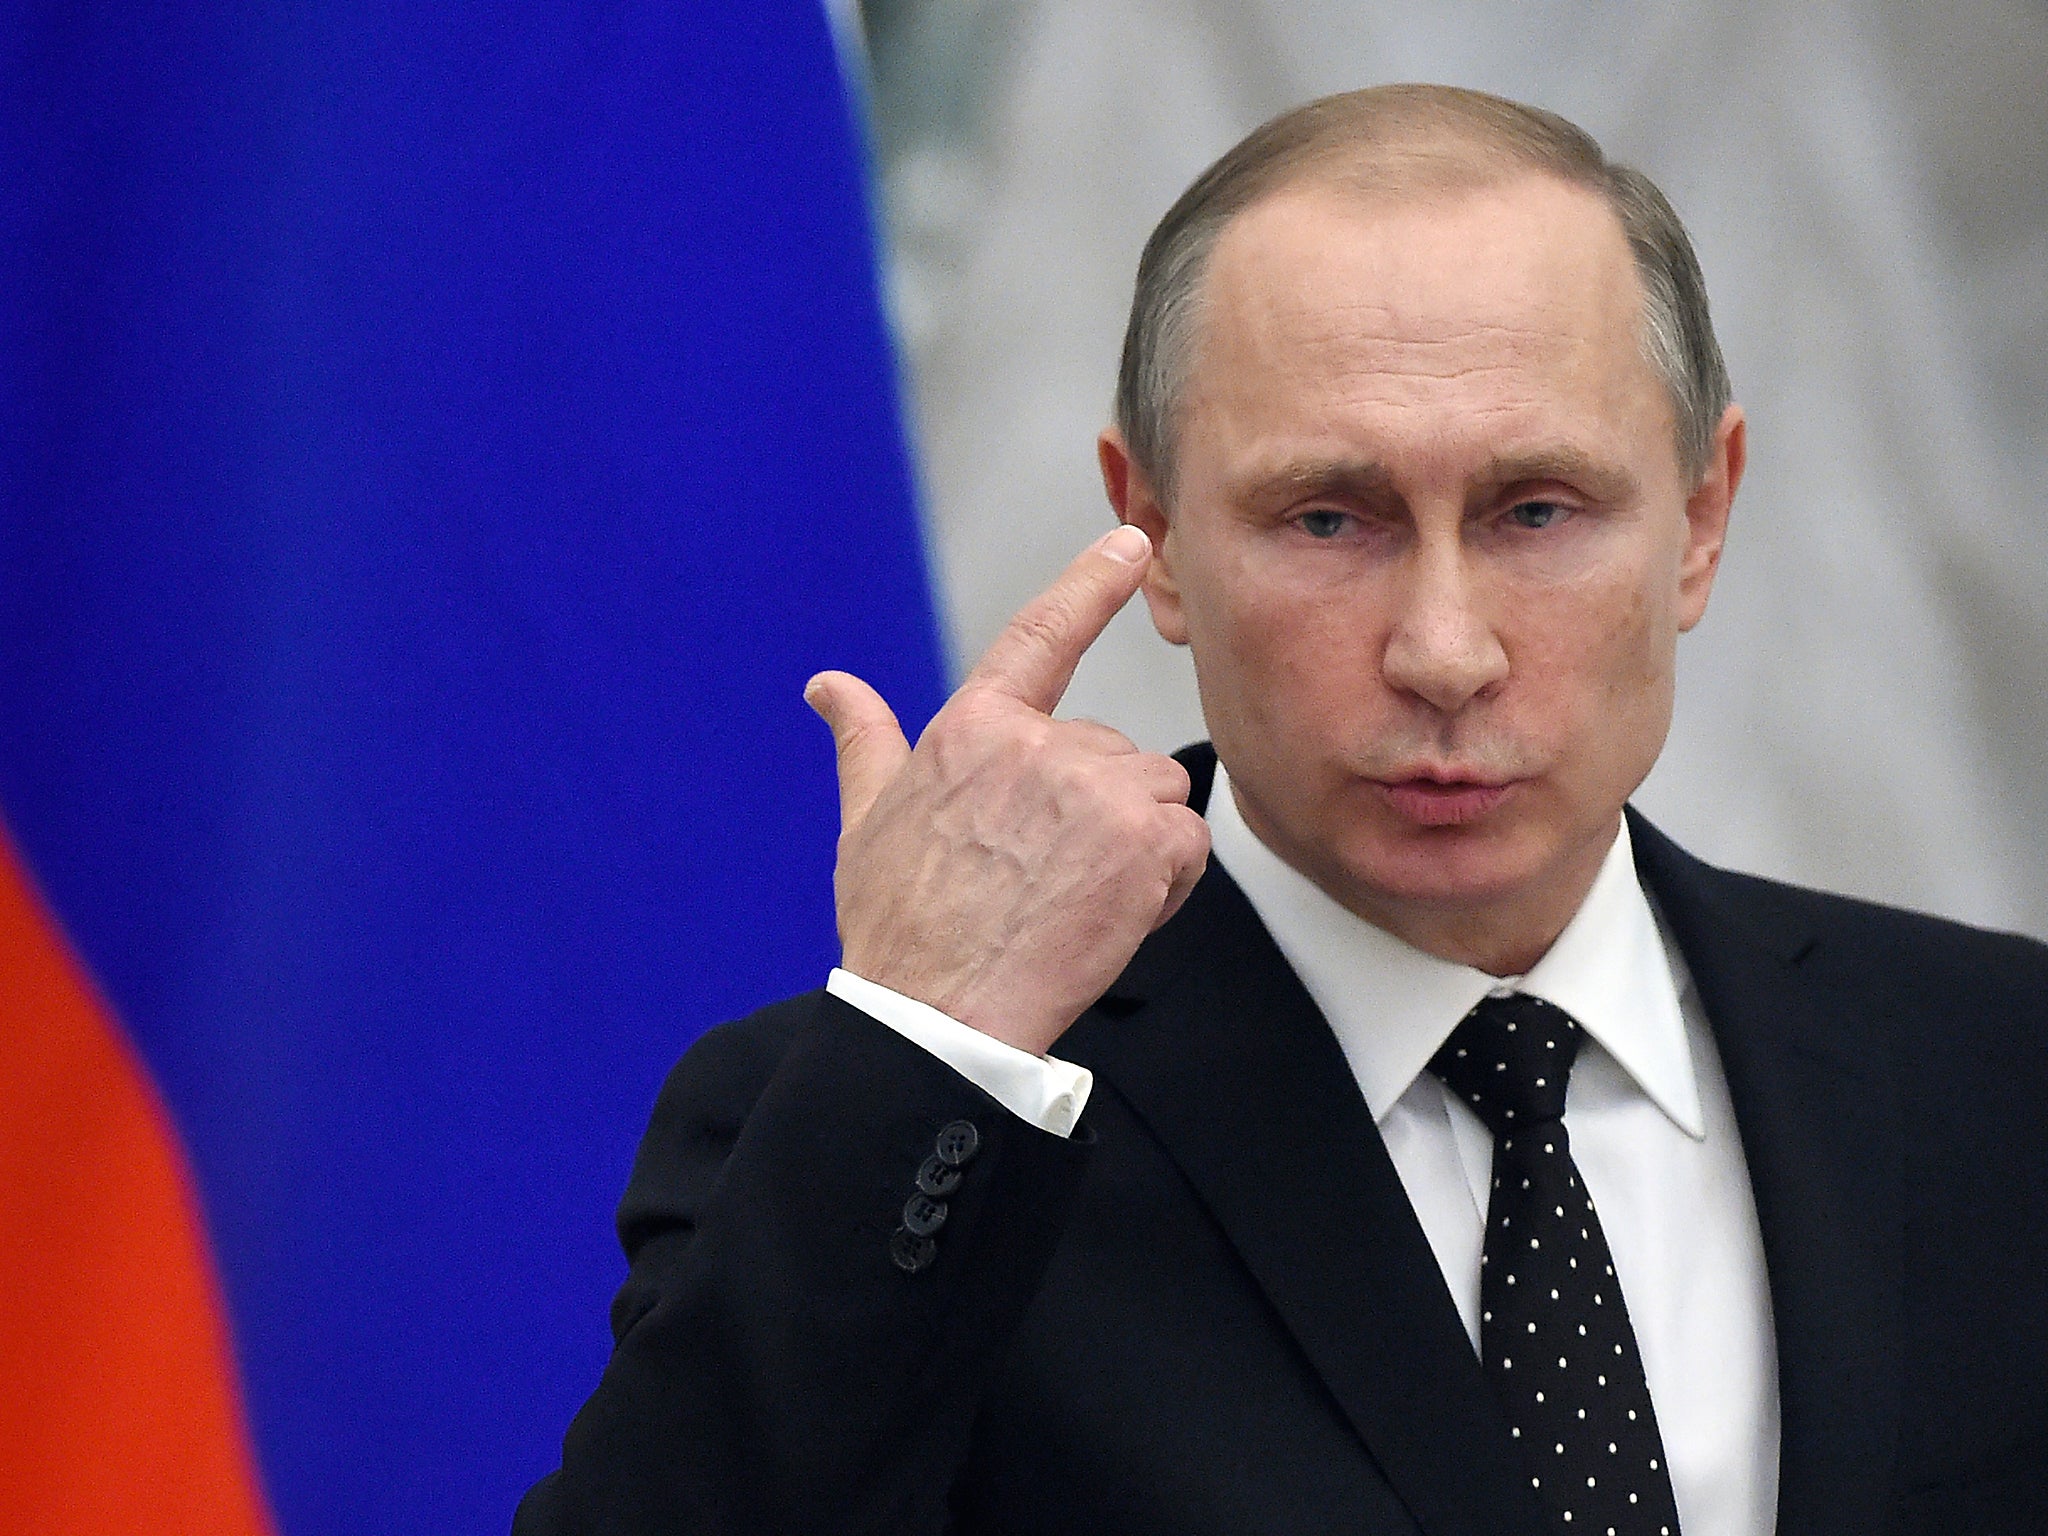 Vladimir Putin said the melting of the ice in the Artic would open economic opportunities in the region